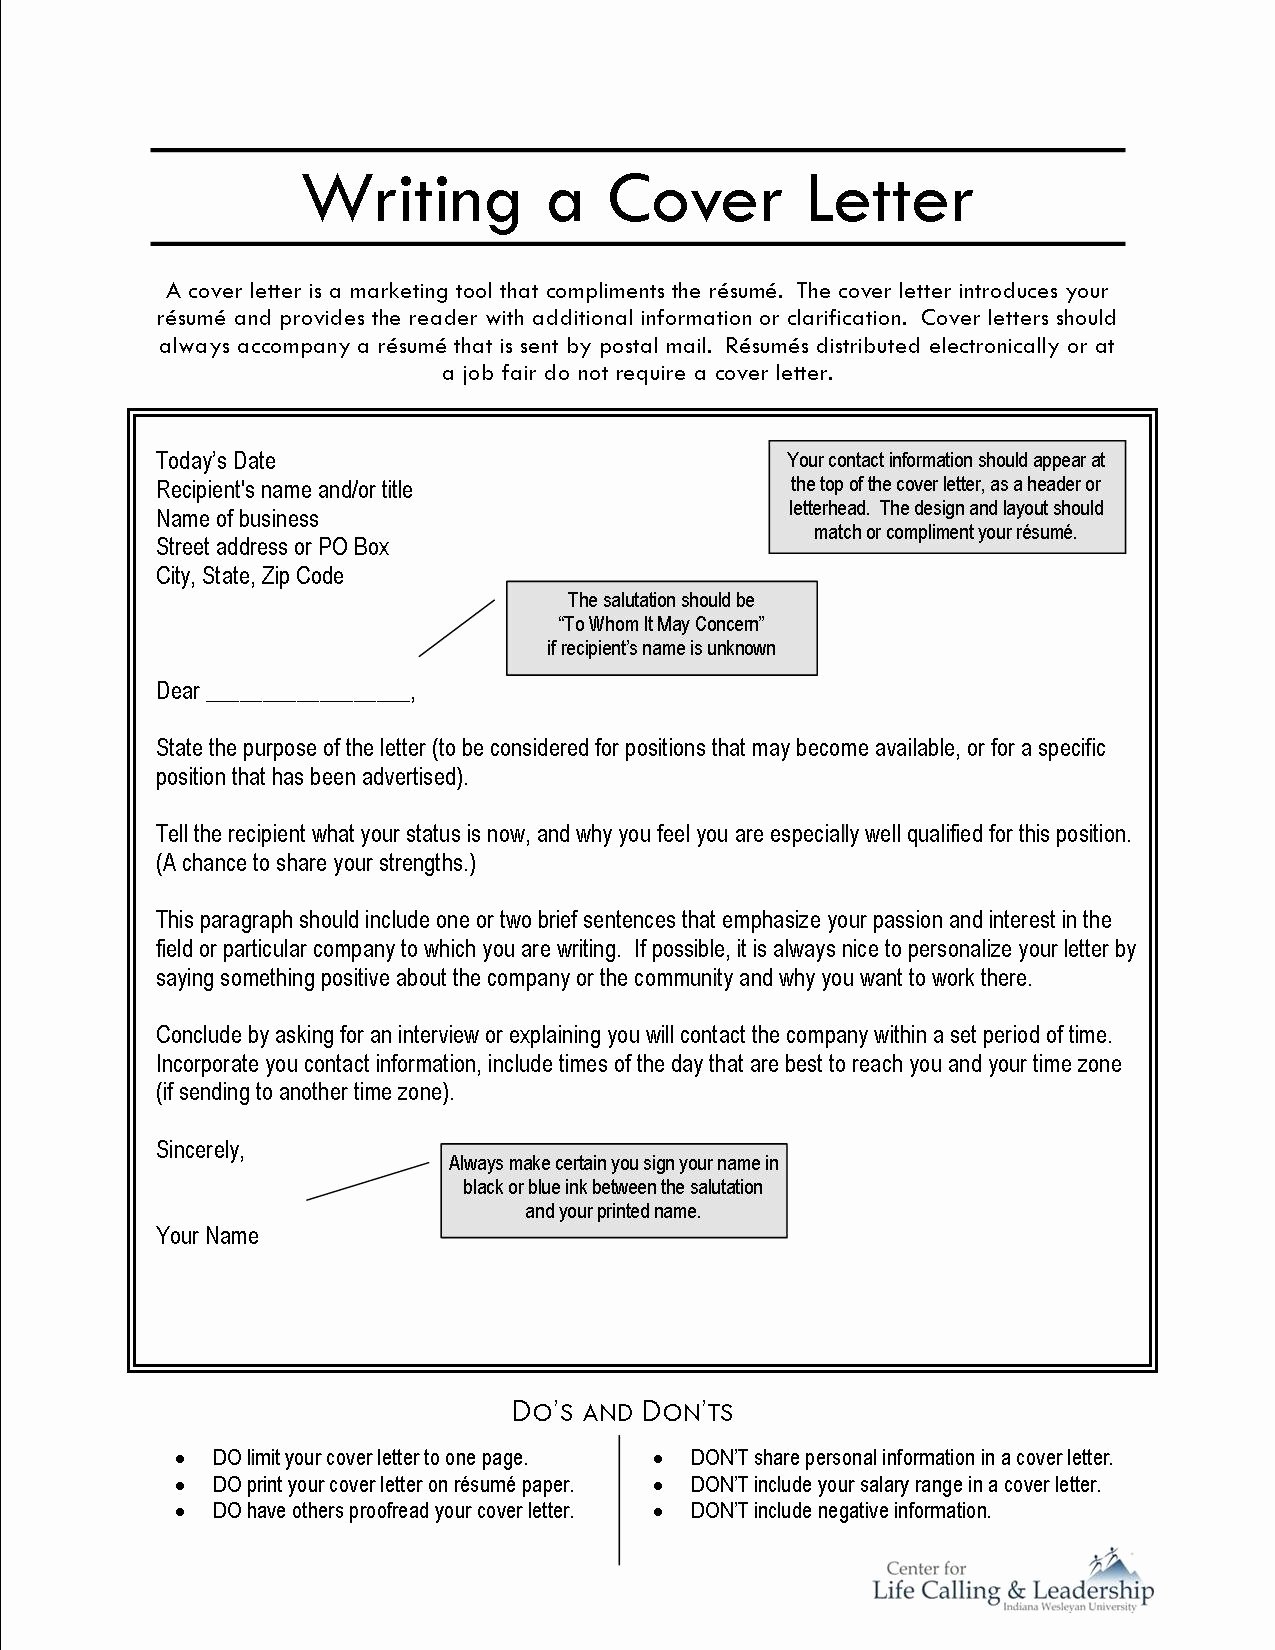 Write A Letter Line and Print Itwritings and Papers